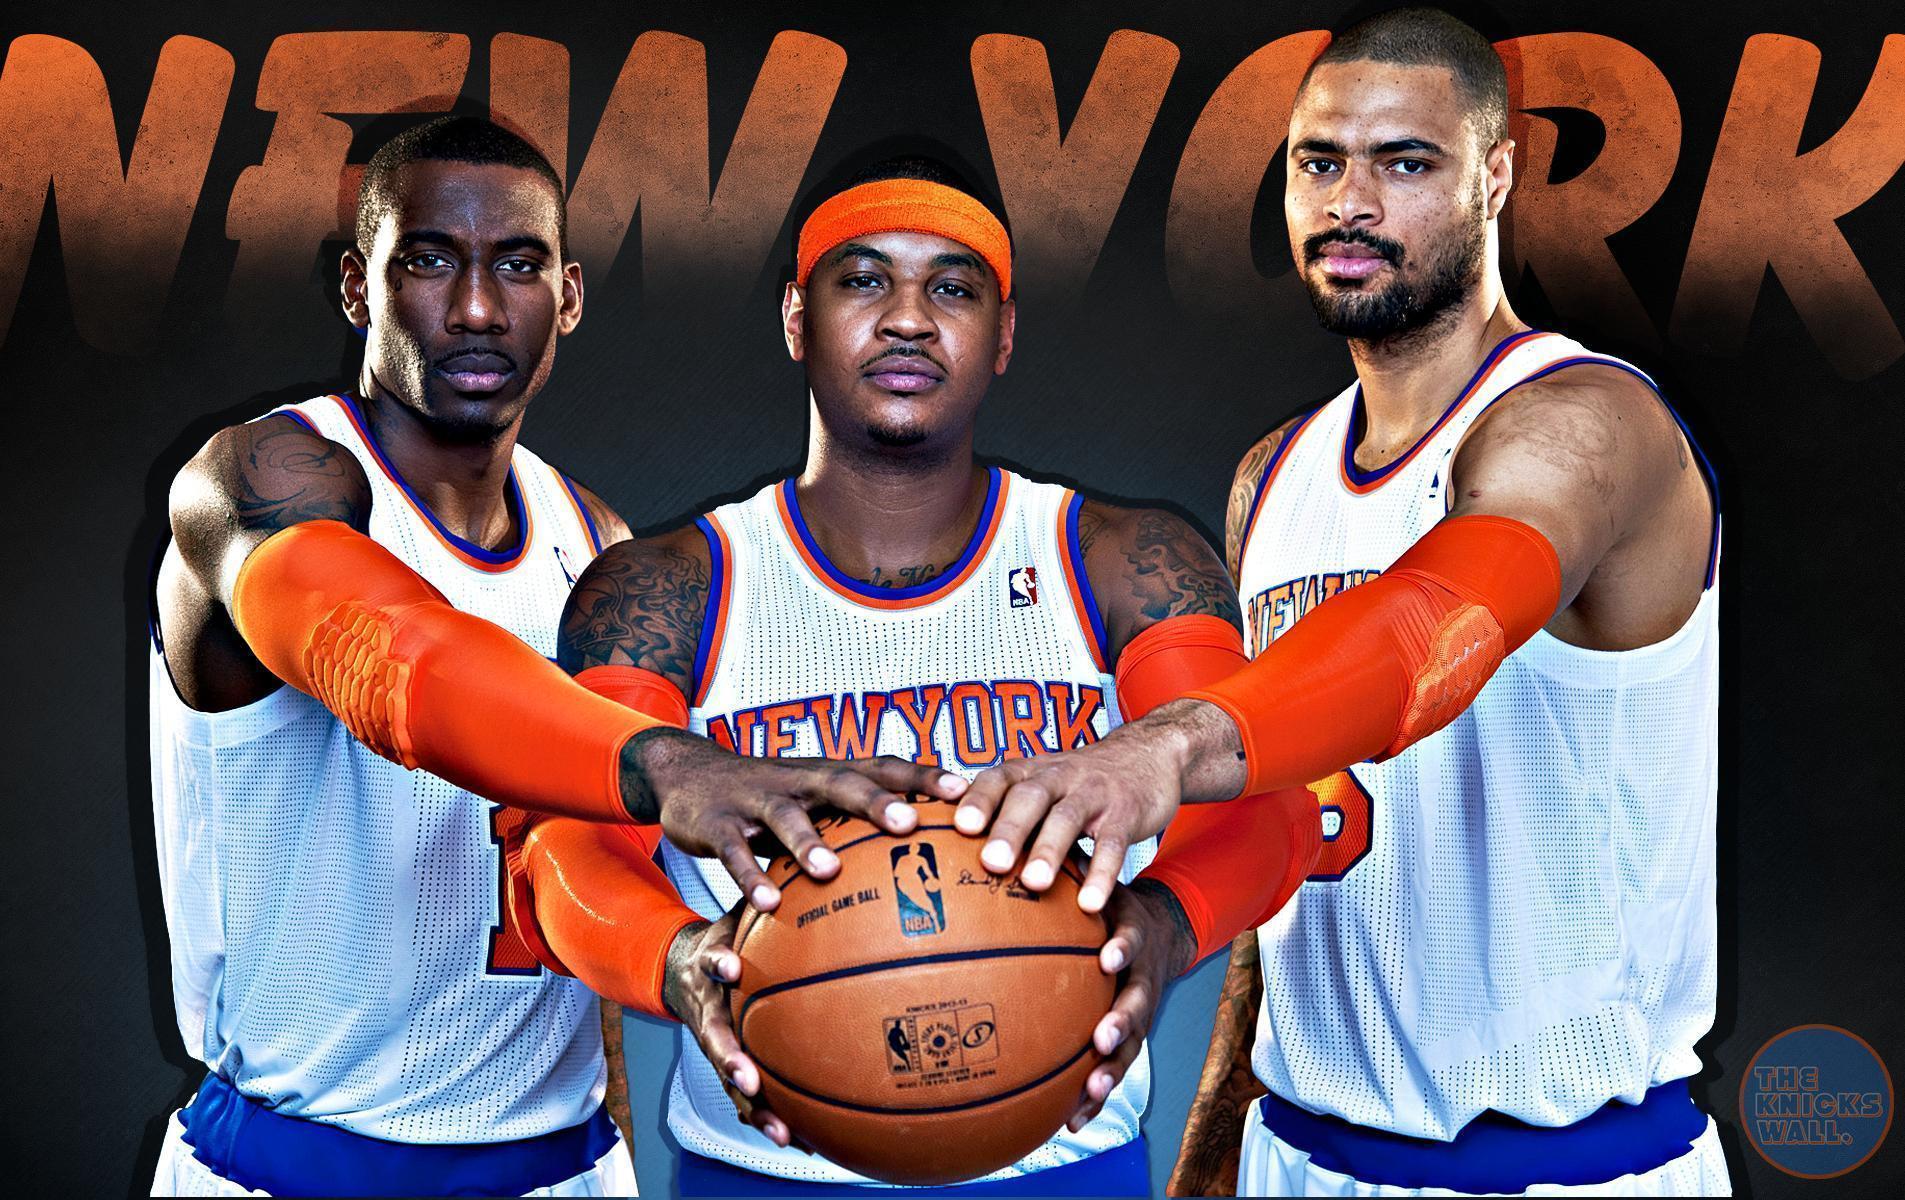 Carmelo Anthony, Amare Stoudemire and Tyson Chandler Wallpaper